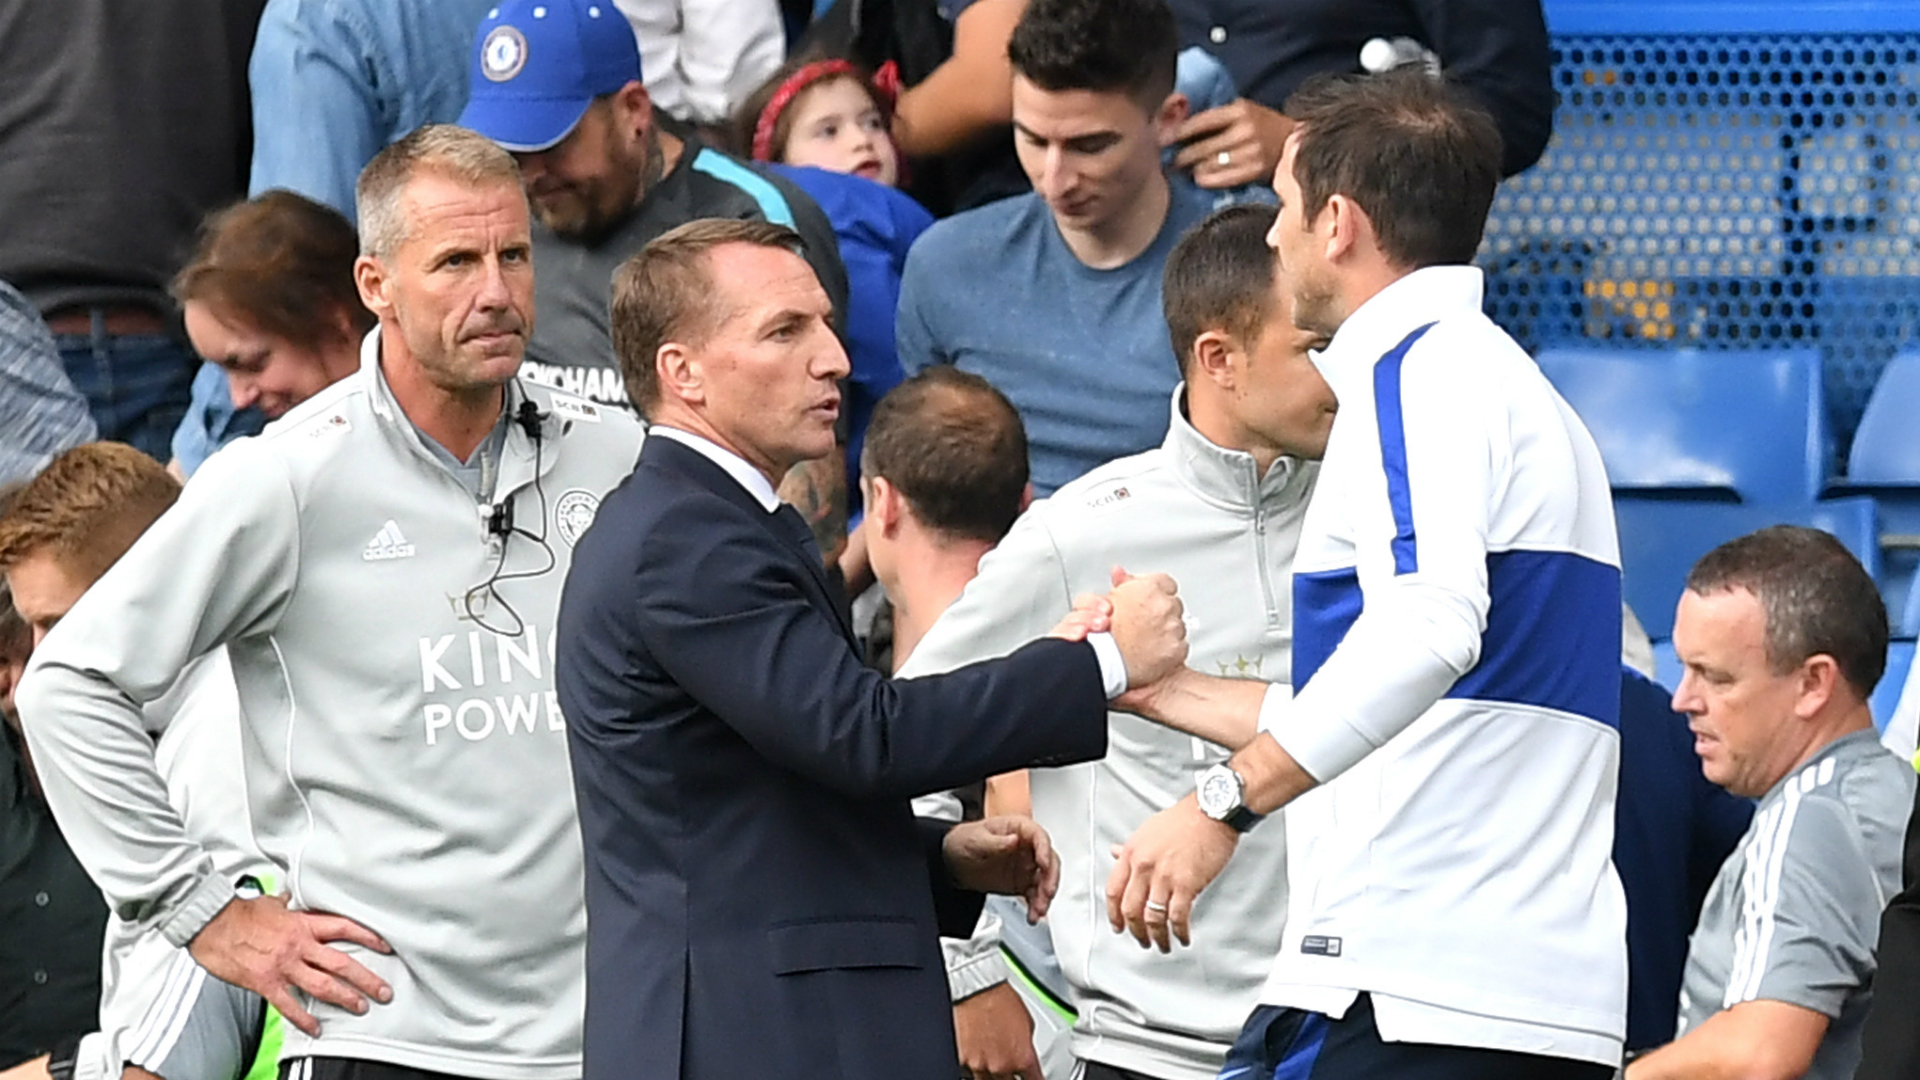 With Leicester City outperforming Chelsea, we use Opta data to examine if the Blues should have hired Brendan Rodgers over Frank Lampard.